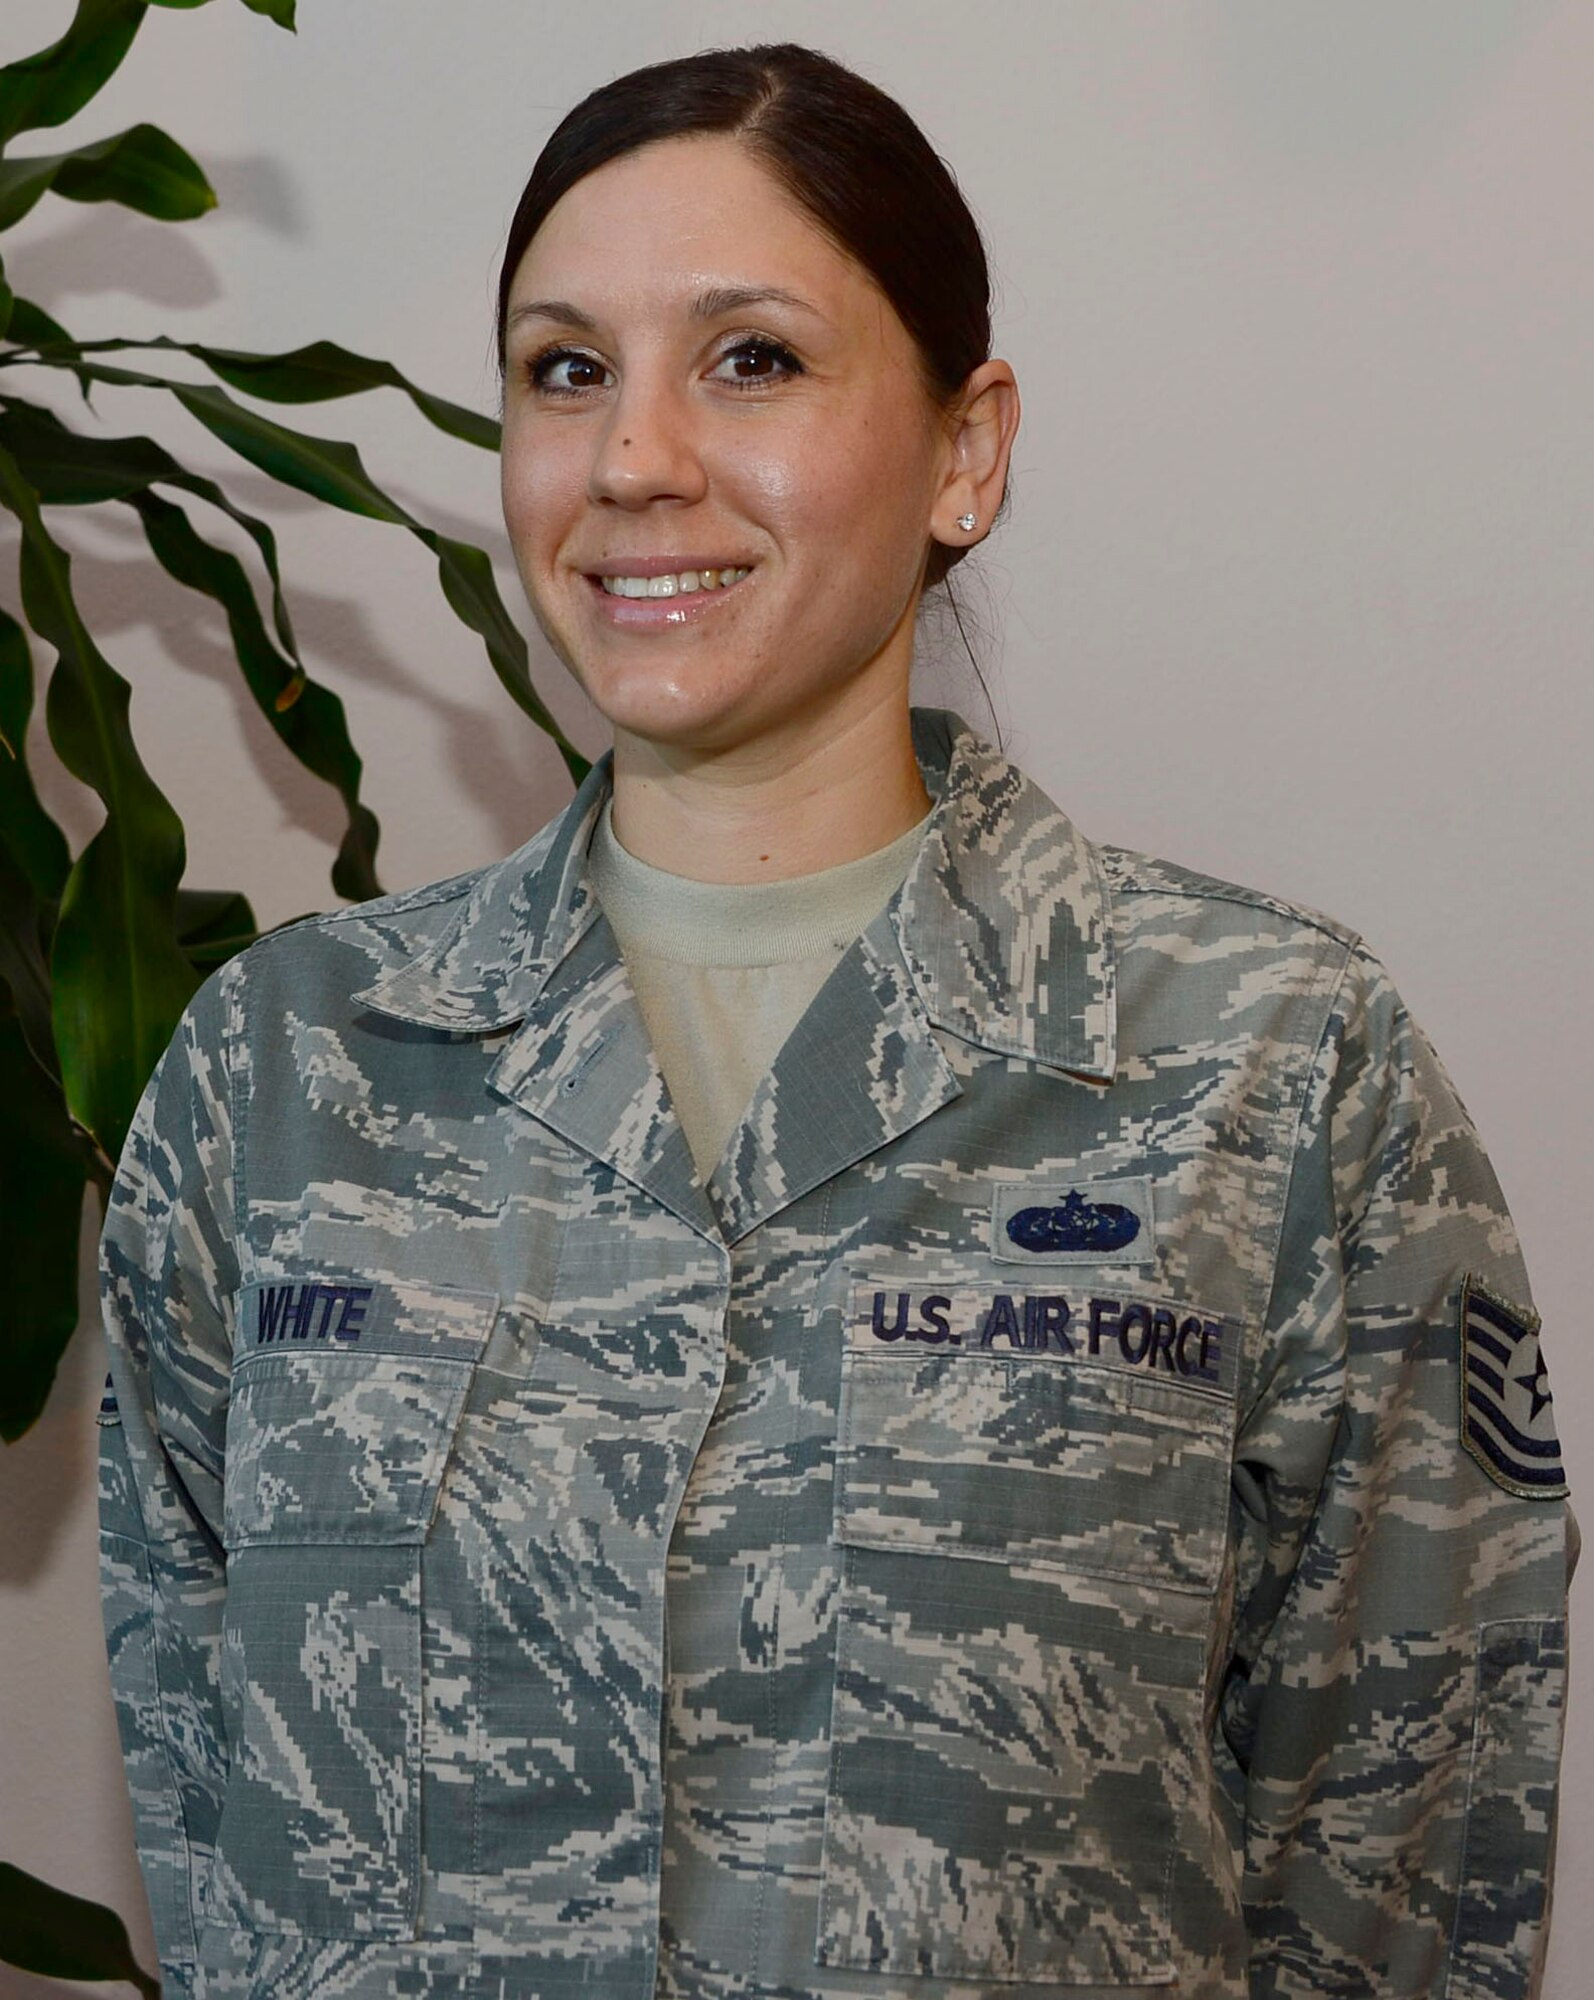 Tech. Sgt. Cassandra White, 12th Air Force (Air Forces Southern) non-commissioned officer in charge of knowledge management was recognized as the Warfighter of the Week, Jan. 25, 2016.  War Fighter of the Week is an opportunity for the Airmen who represent 12th Air Force (Air Forces Southern) to share their own story. The Warfighter of the Week initiative aligns with the 12th Air Force (Air Forces Southern) commander’s priority of creating a work environment where someone knows you both professionally and personally. (U.S. Air Force photo by Tech. Sgt. Heather R. Redman/Released)